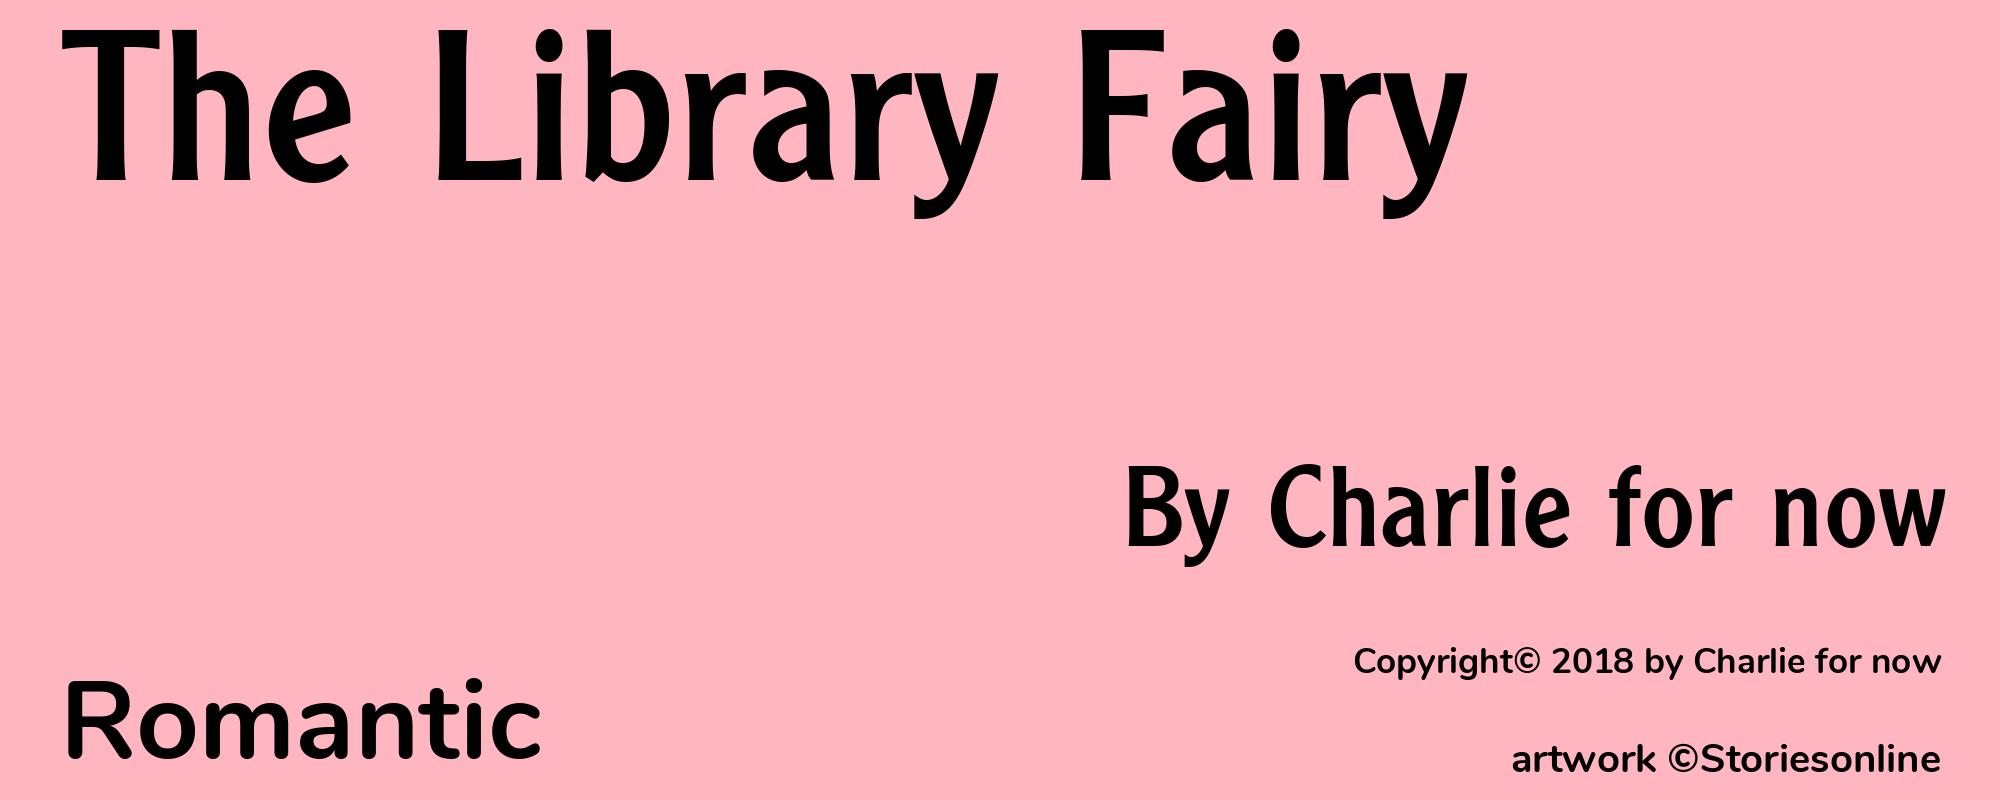 The Library Fairy - Cover